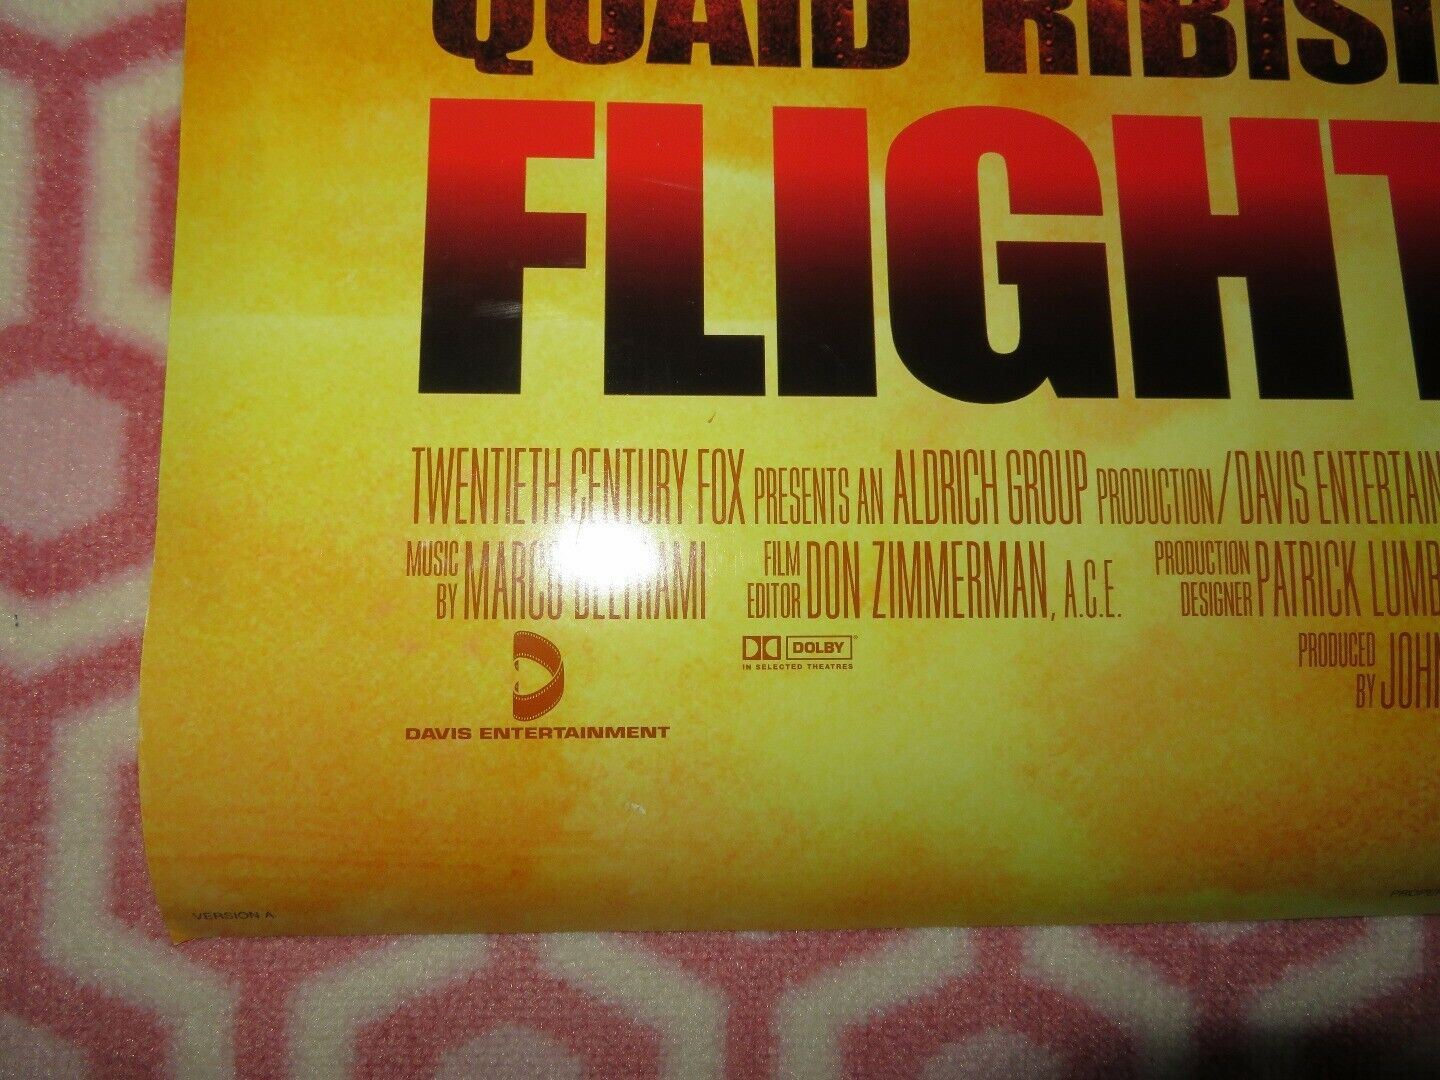 FLIGHT OF THE PHOENIX VERSION A US ROLLED POSTER DENNIS QUAID 2004